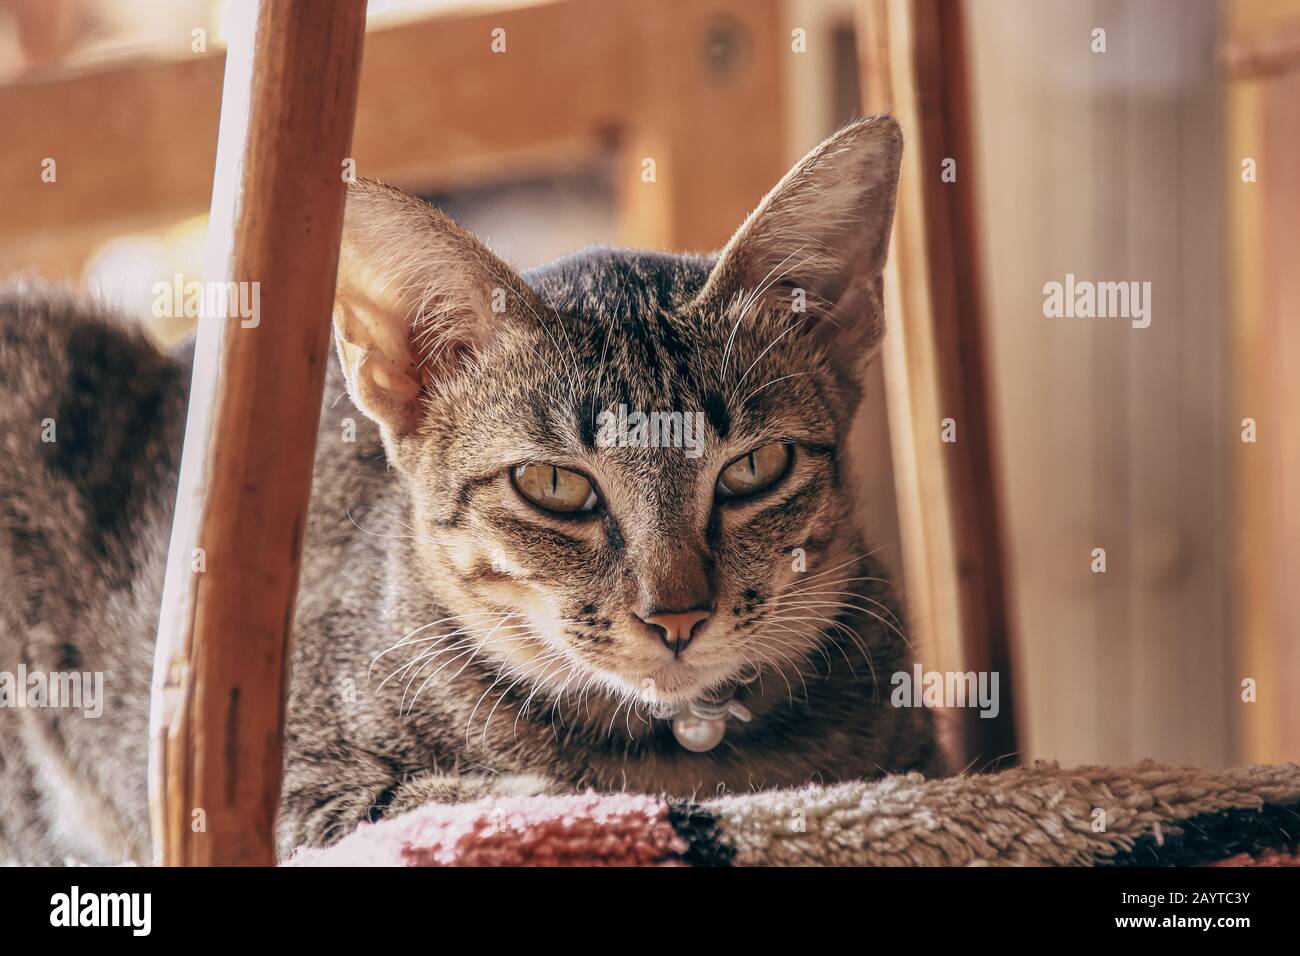 A very bored and sleeping pet cat that is stuck in home quarantine during the covid-19 outbreak Stock Photo